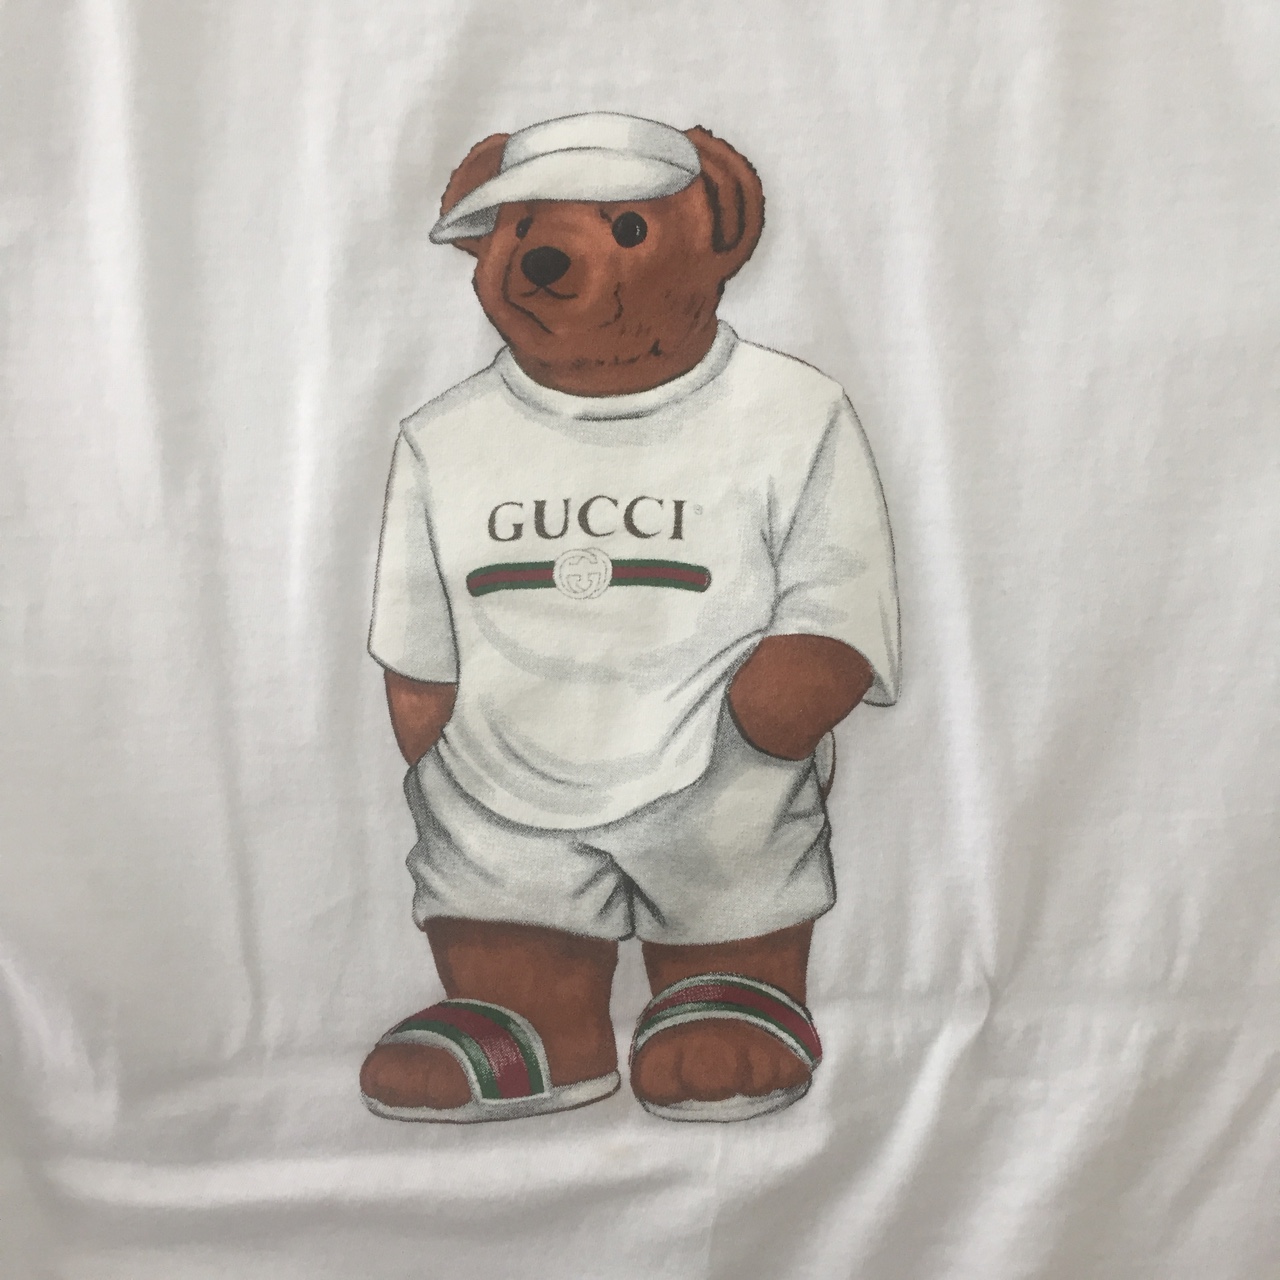 Brand New Mike The Bear 'Life's Gucci' T Shirt, Size